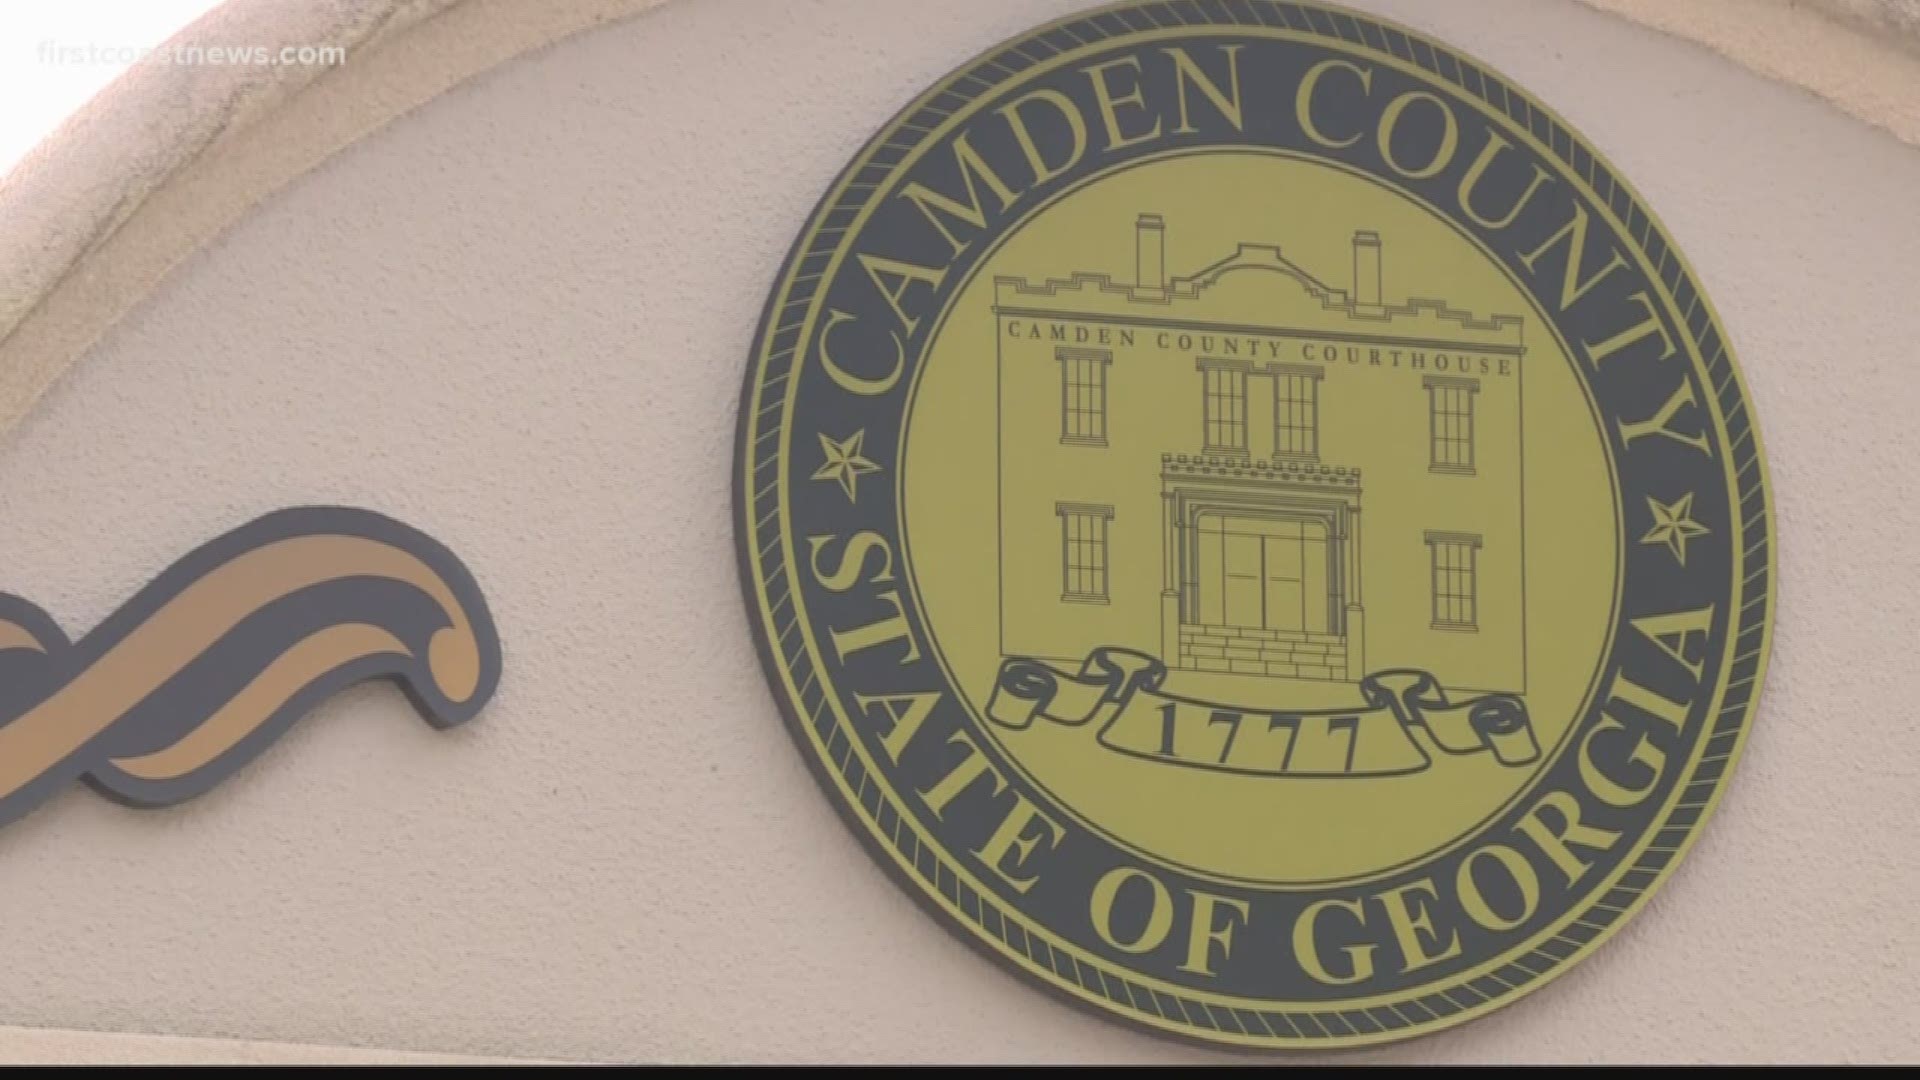 Law enforcement in Camden County is investigating multiple deaths with unexplained causes, saying it may be linked to a powdery substance believed to be cocaine, according to a press release by the District Attorney of the Brunswick Judicial Circuit.